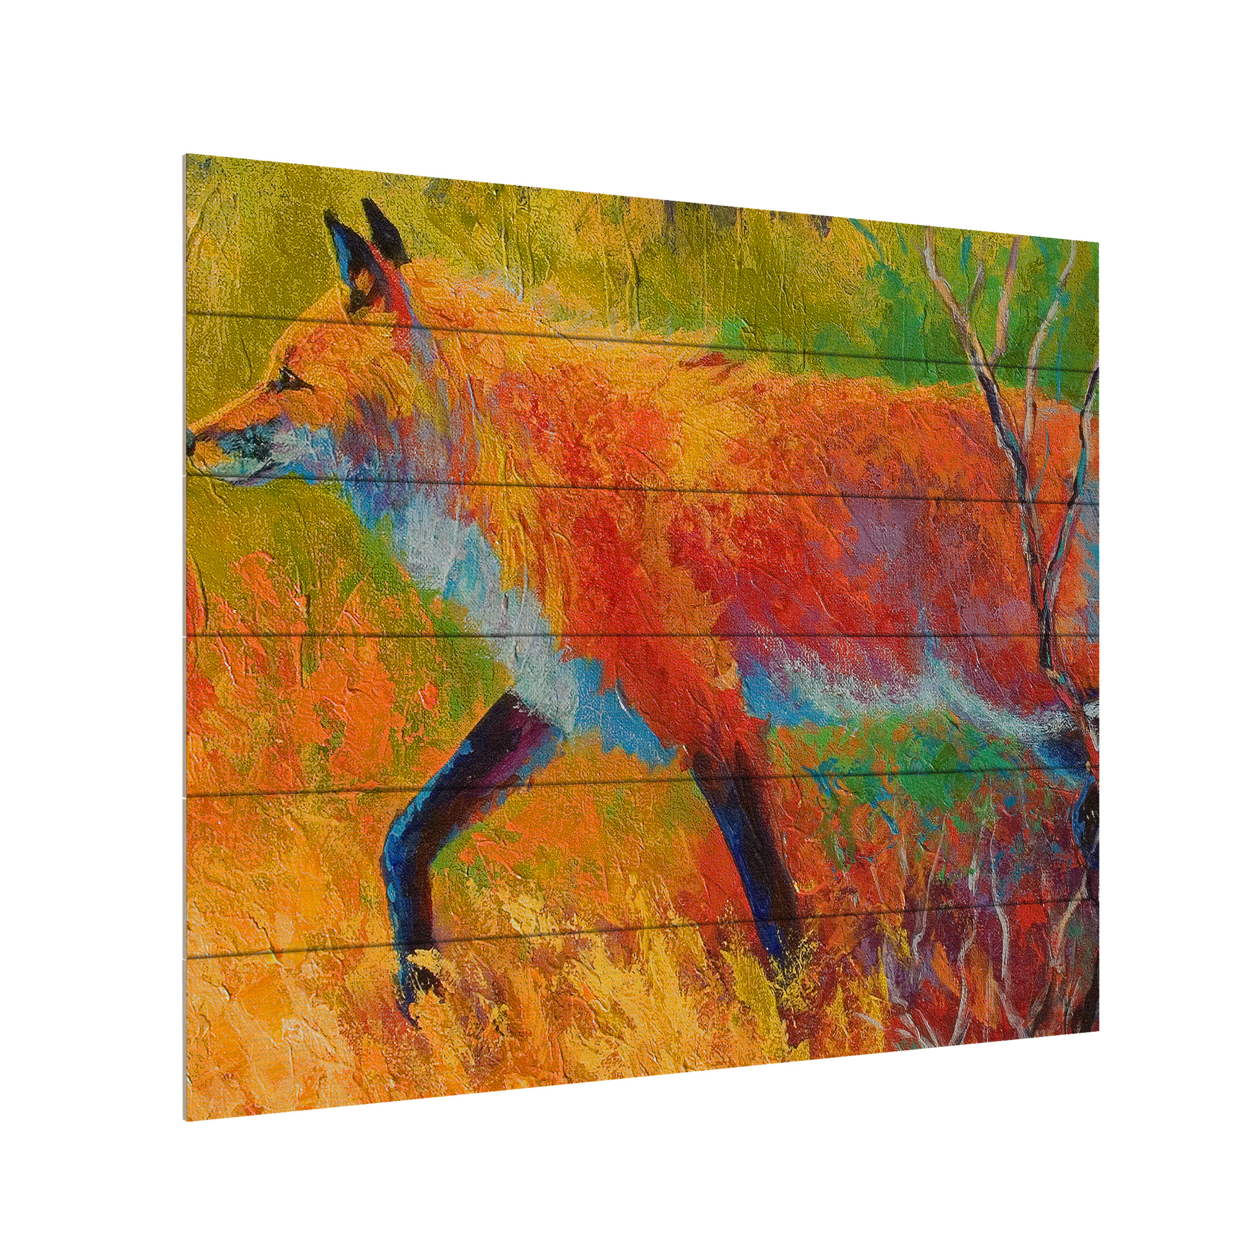 Wooden Slat Art 18 X 22 Inches Titled Red Fox 1 Ready To Hang Home Decor Picture